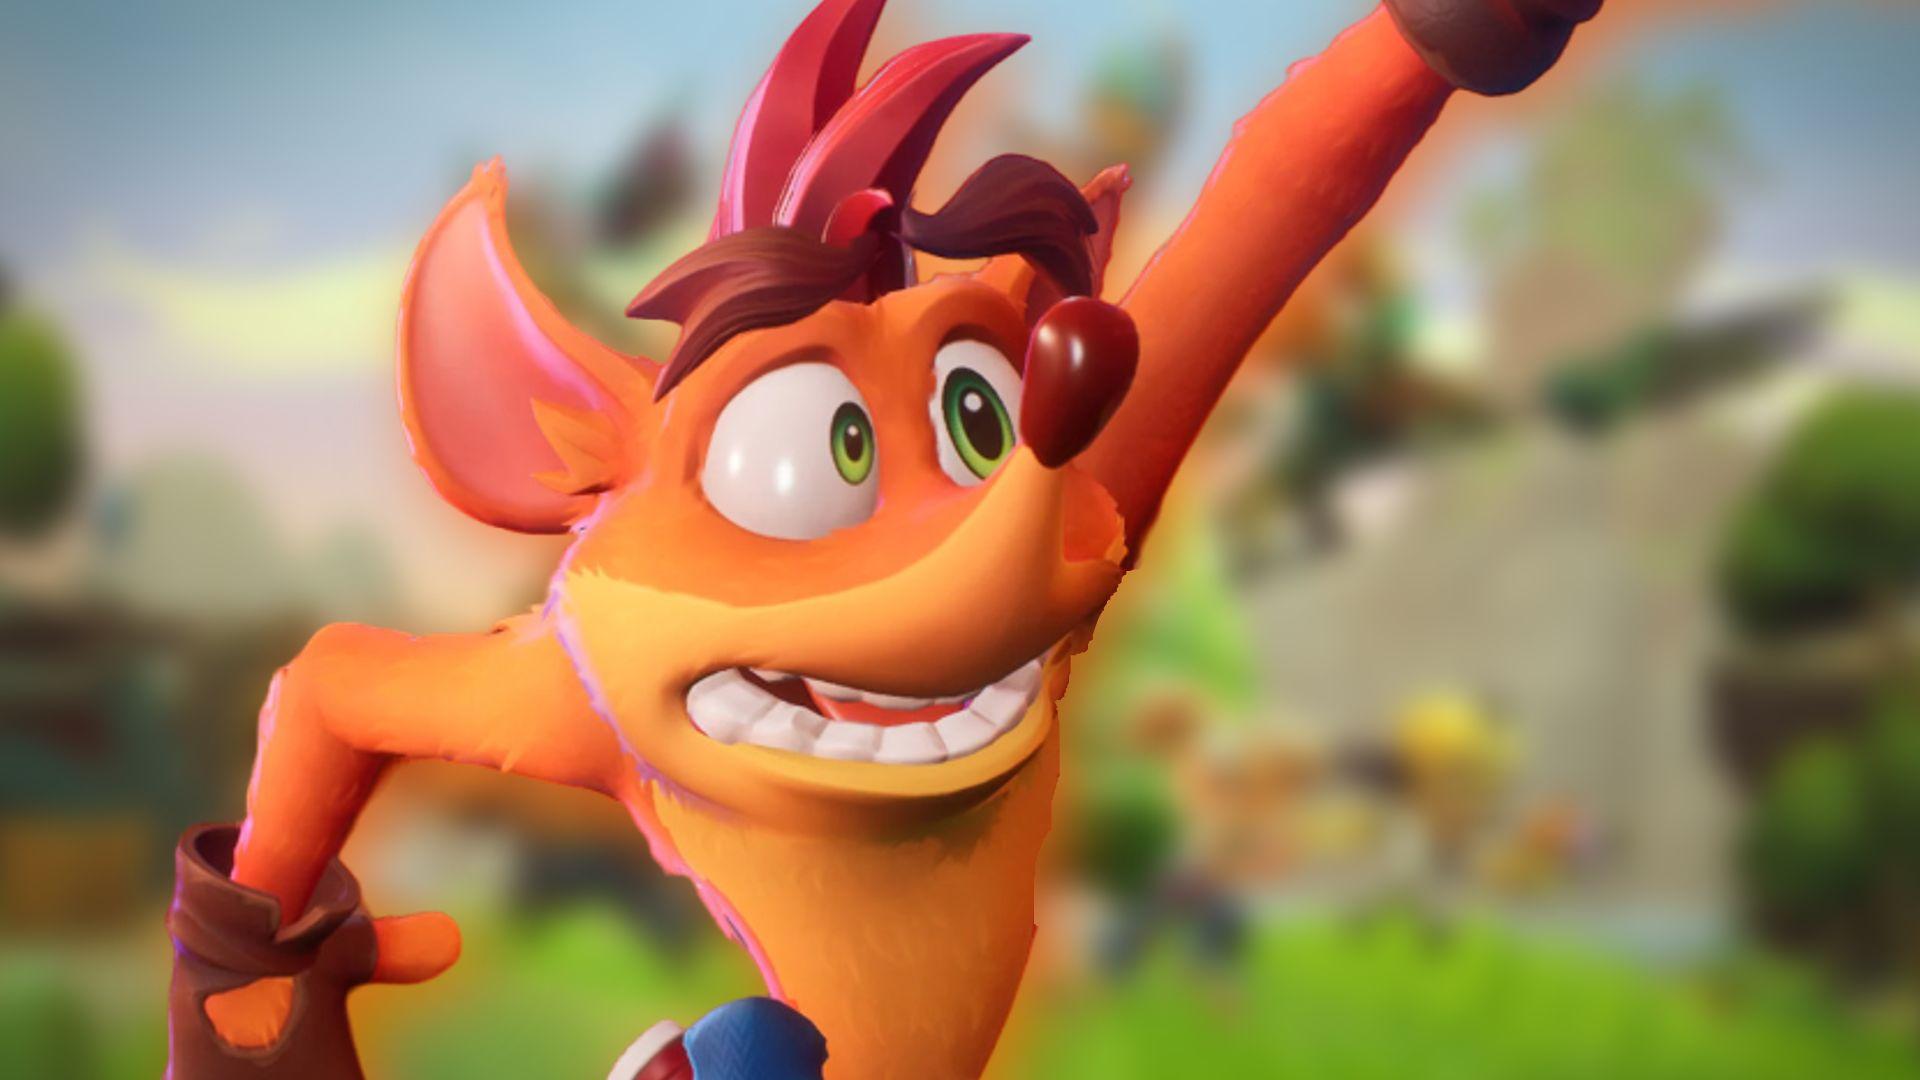 Crash Team Rumble is a New 4v4 Multiplayer Game Coming in 2023 - IGN